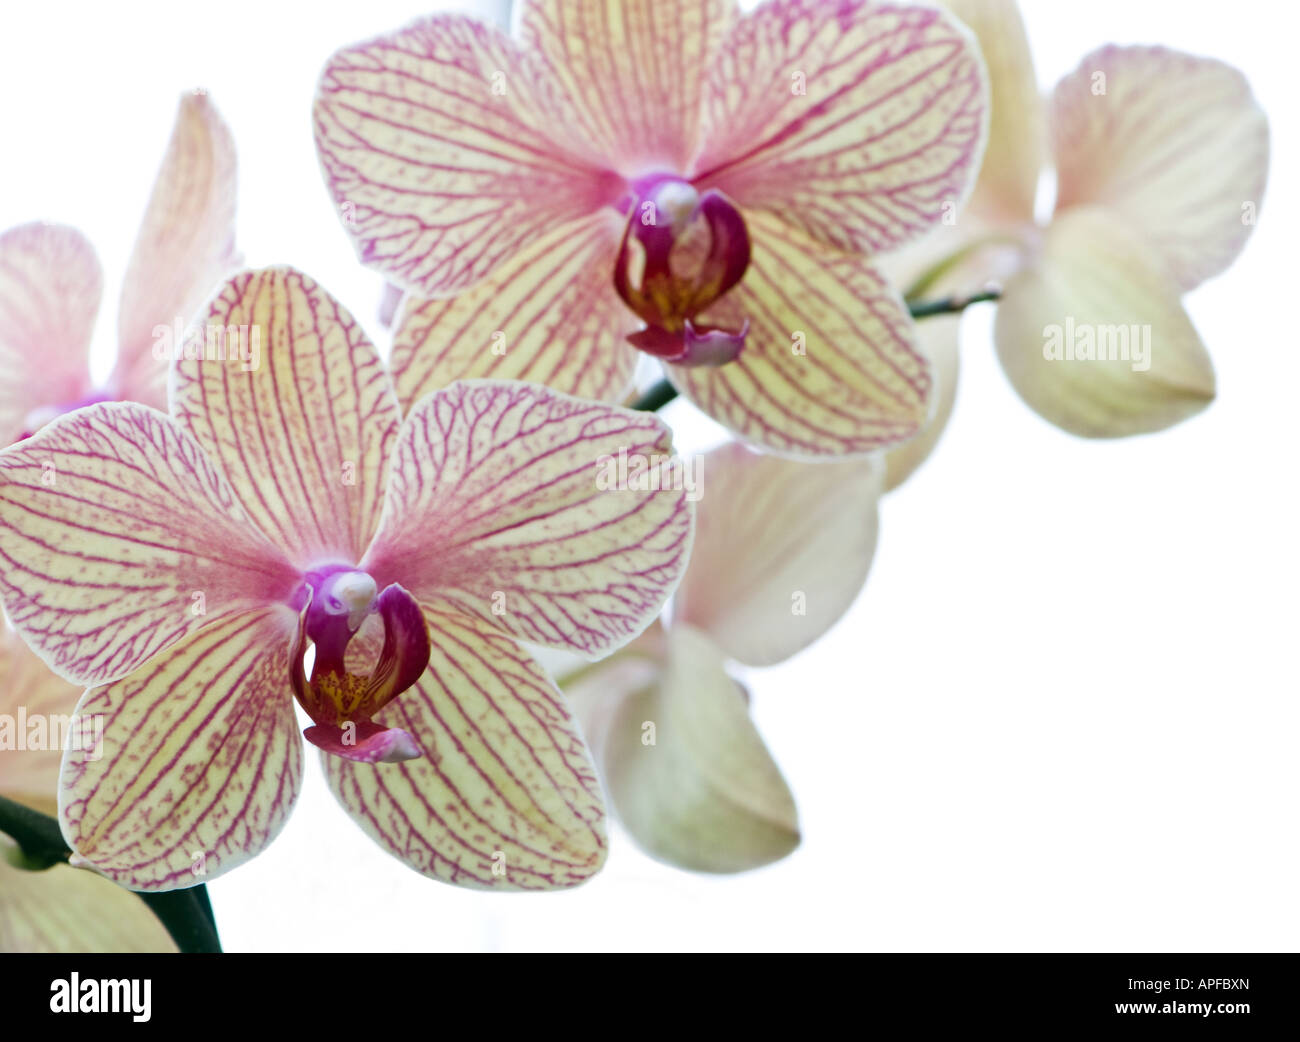 Phalaenopsis or moth orchid Stock Photo